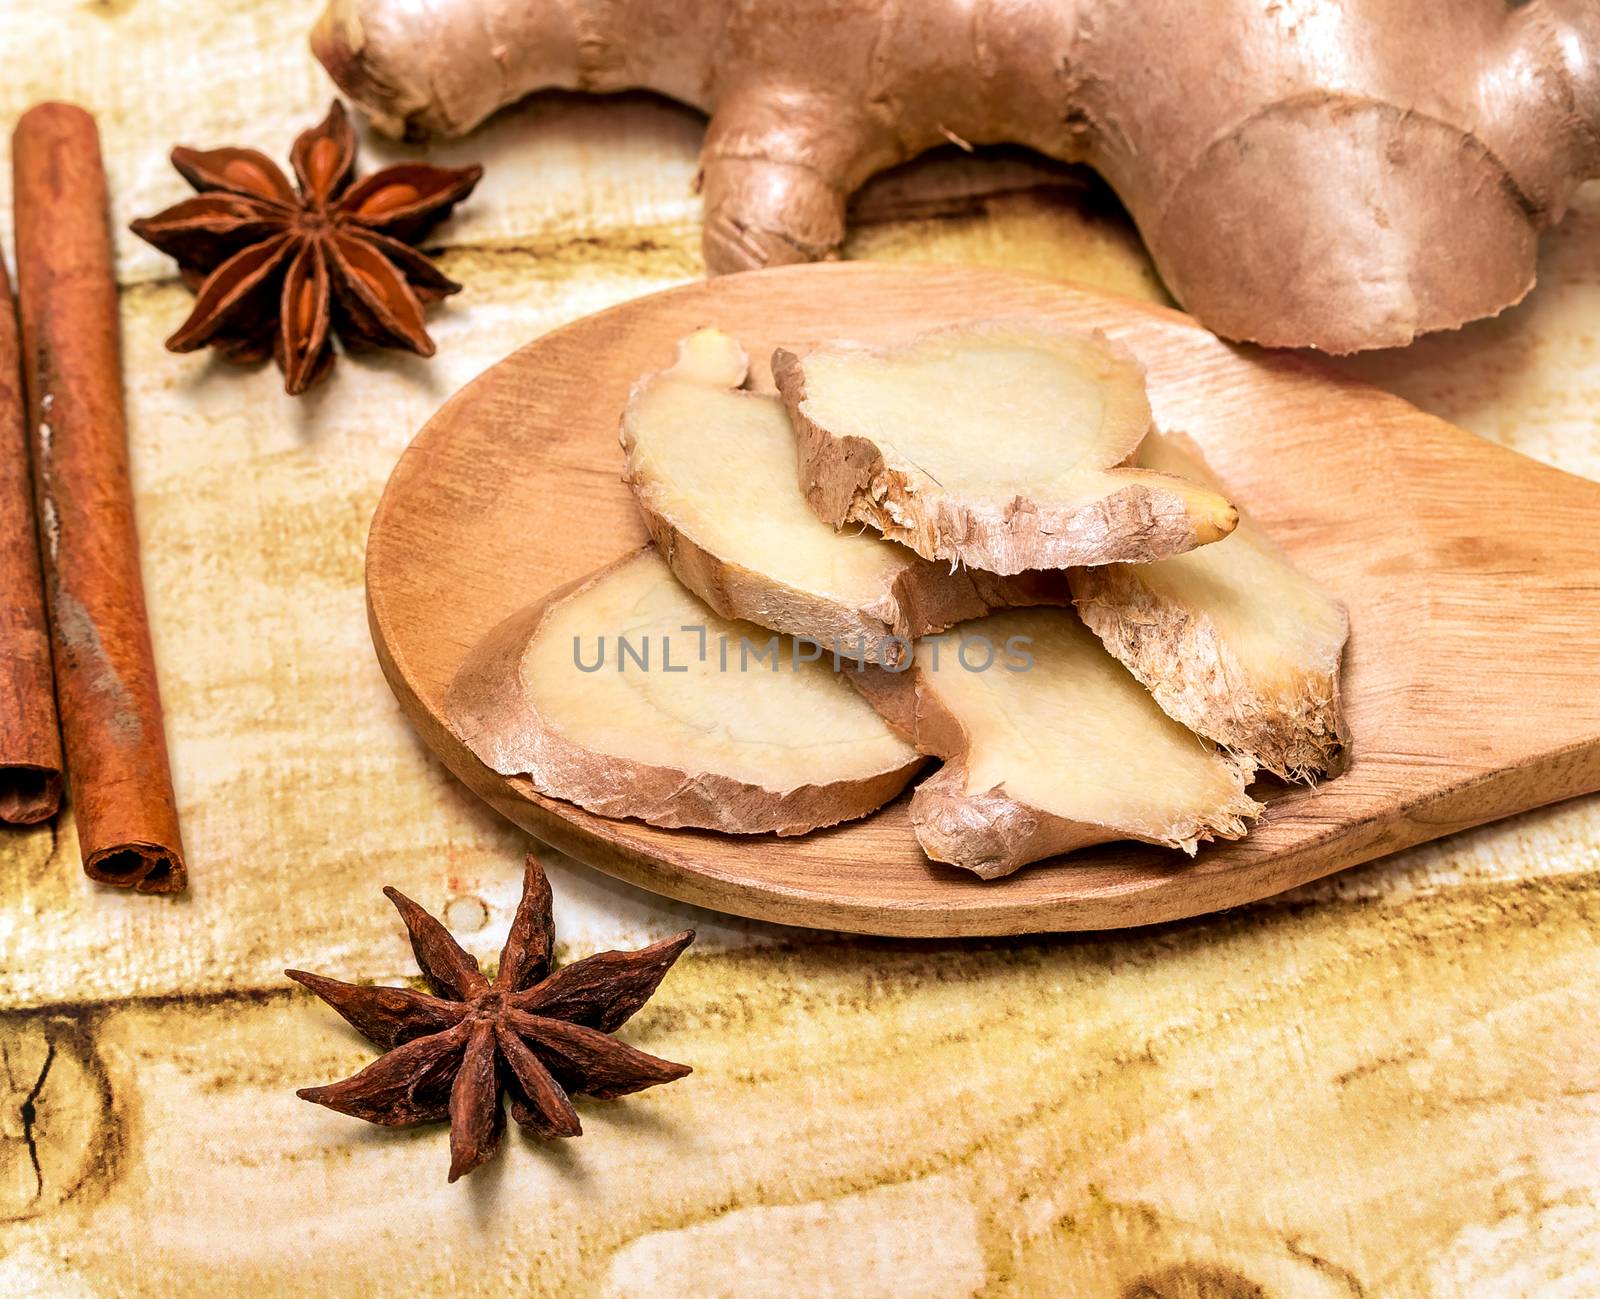 Sliced Ginger Root Showing Star Anise And Spices